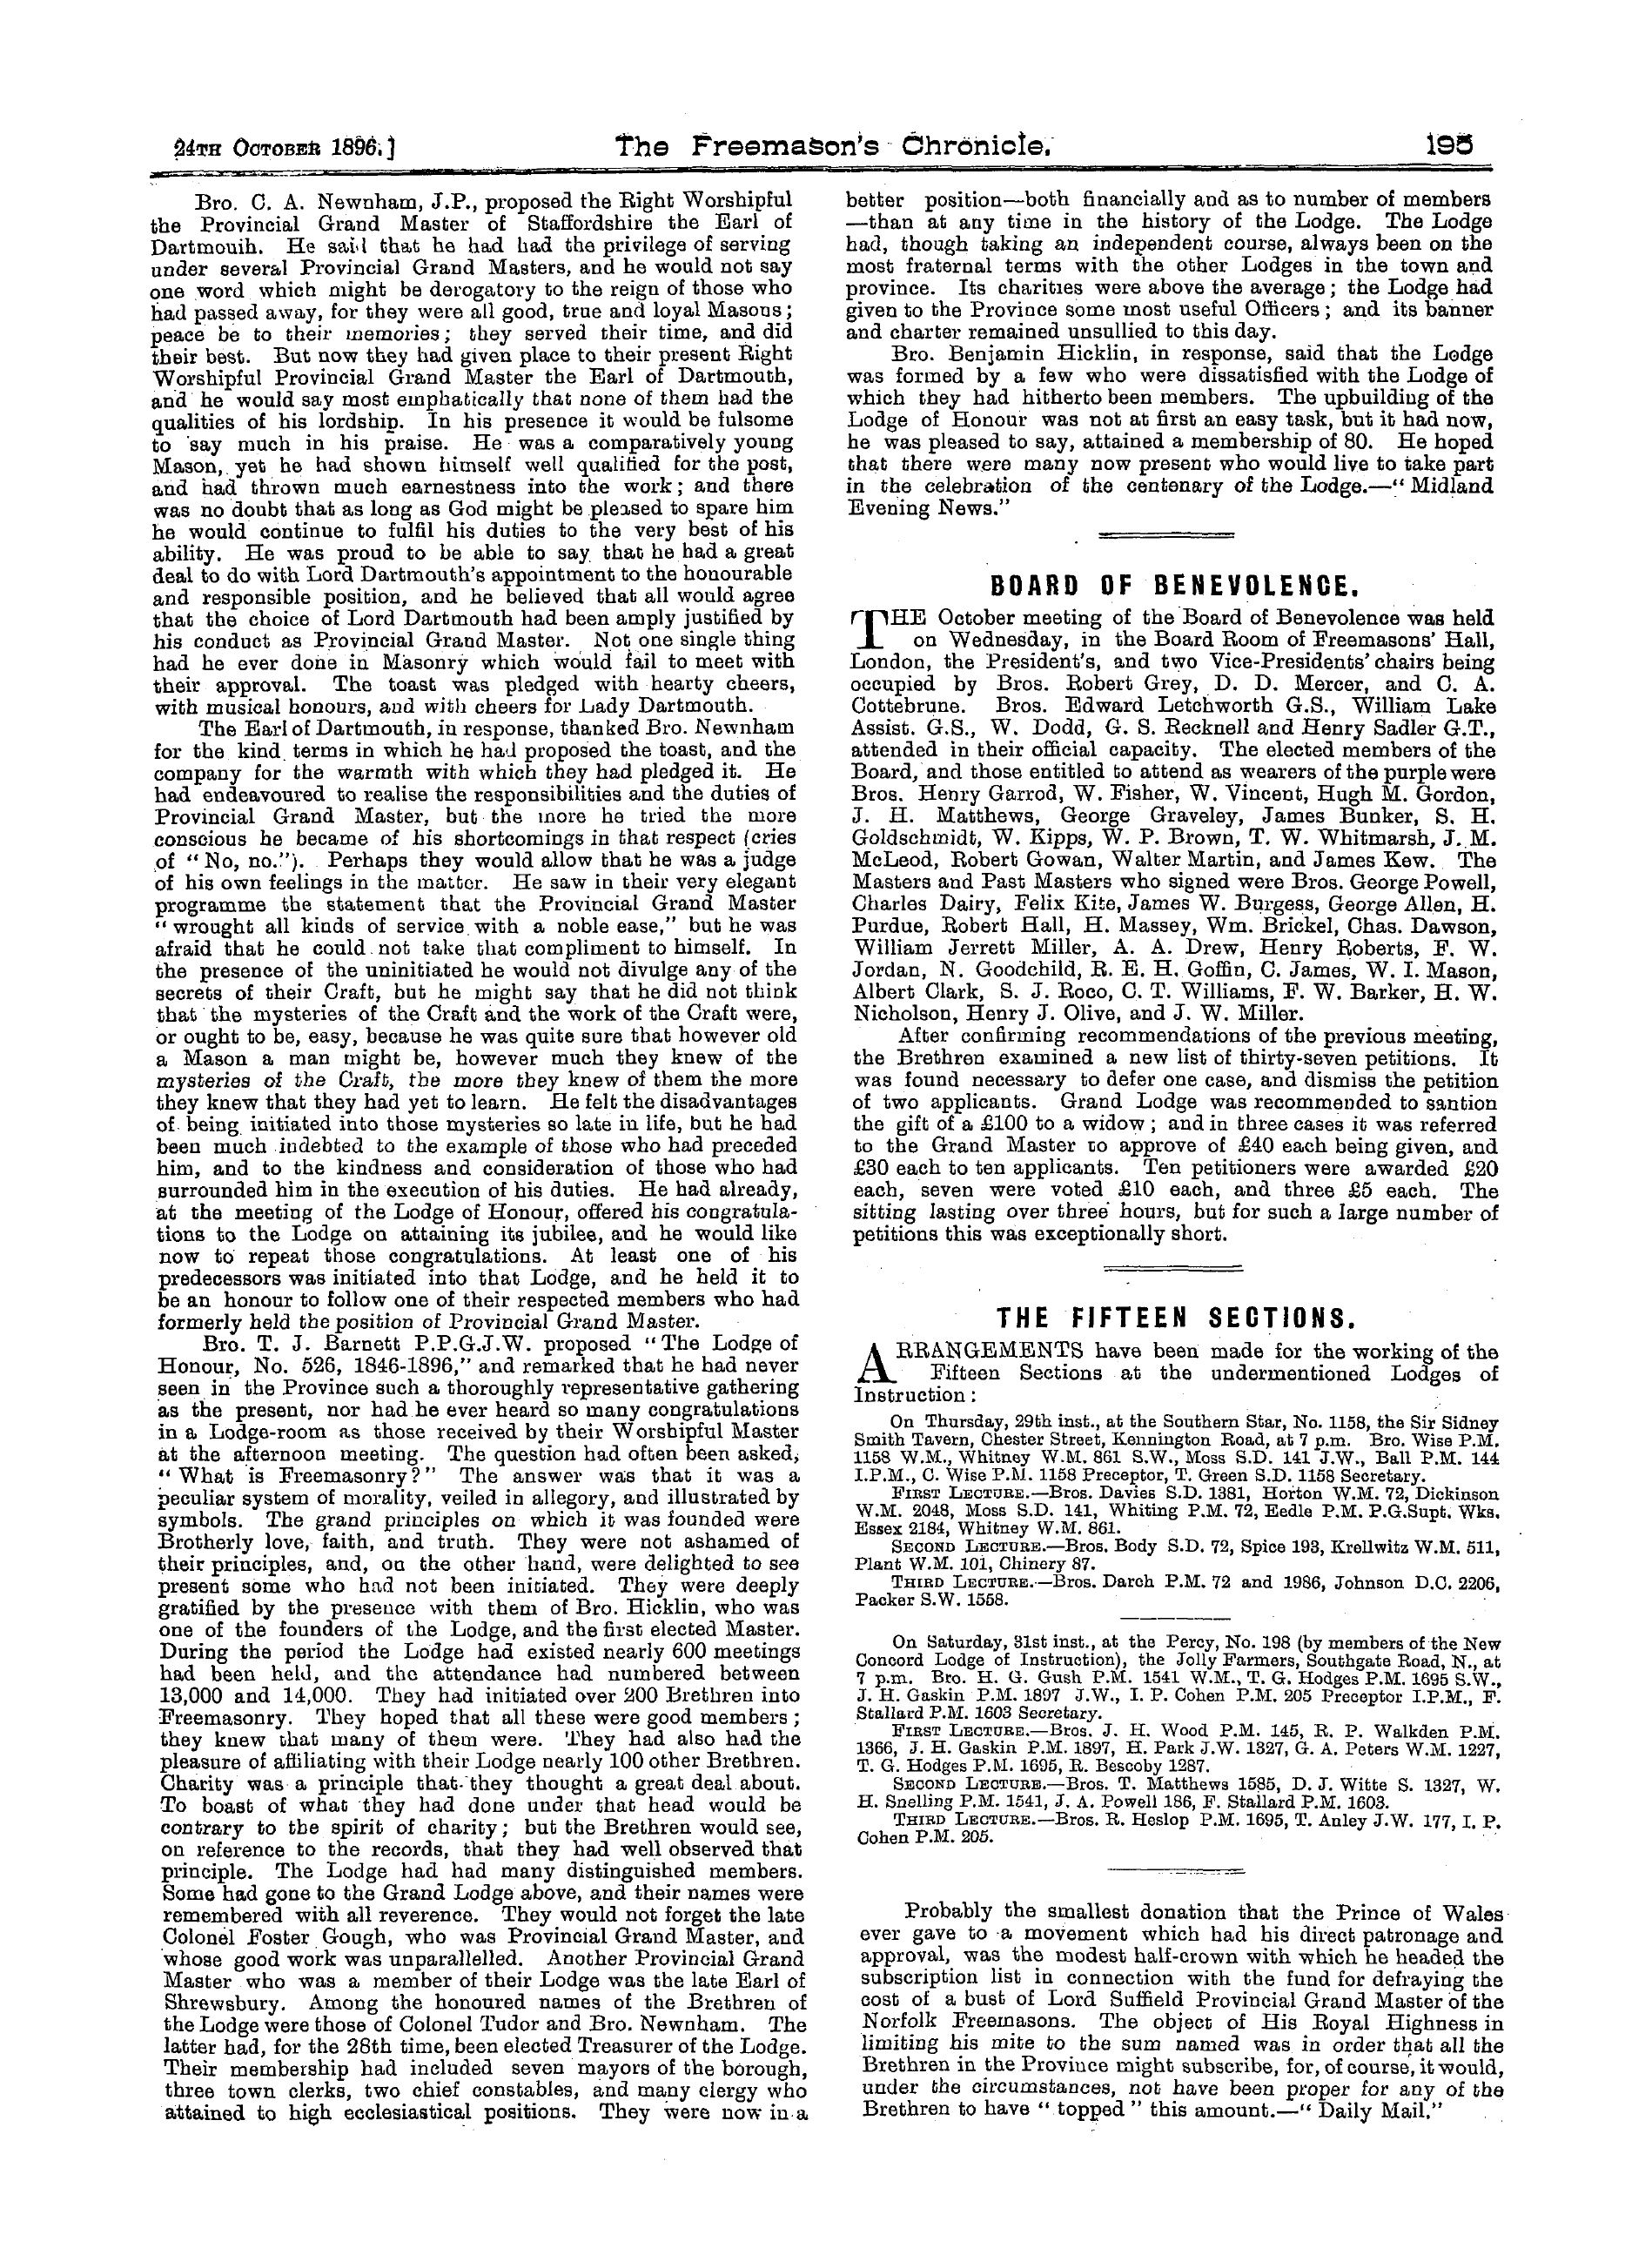 The Freemason's Chronicle: 1896-10-24 - The Fifteen Sections.